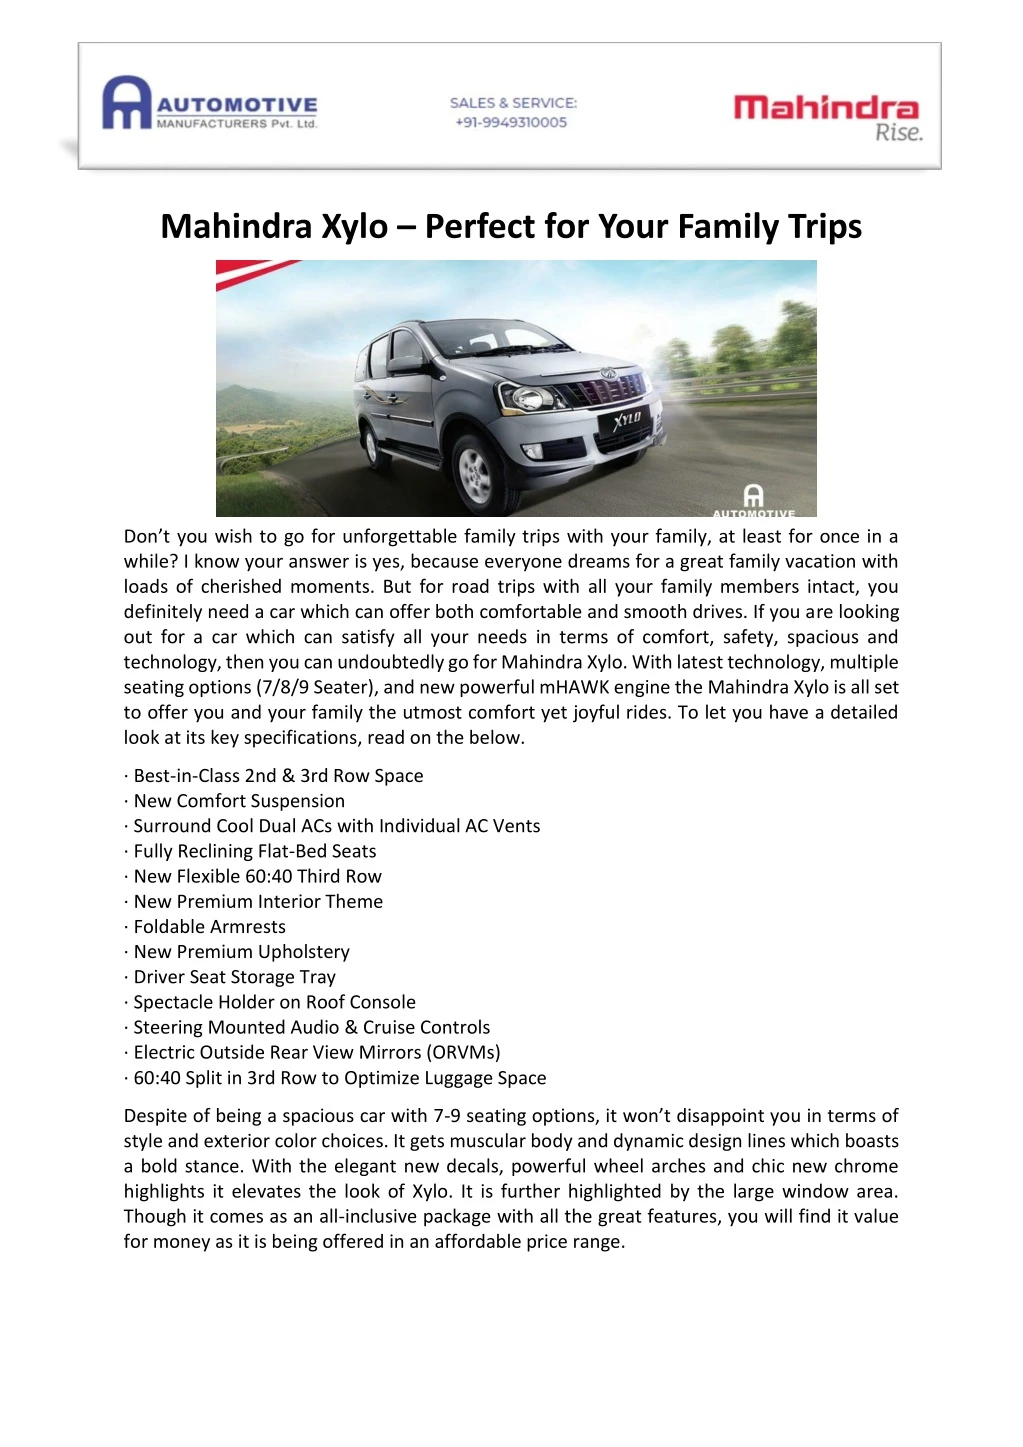 mahindra xylo perfect for your family trips